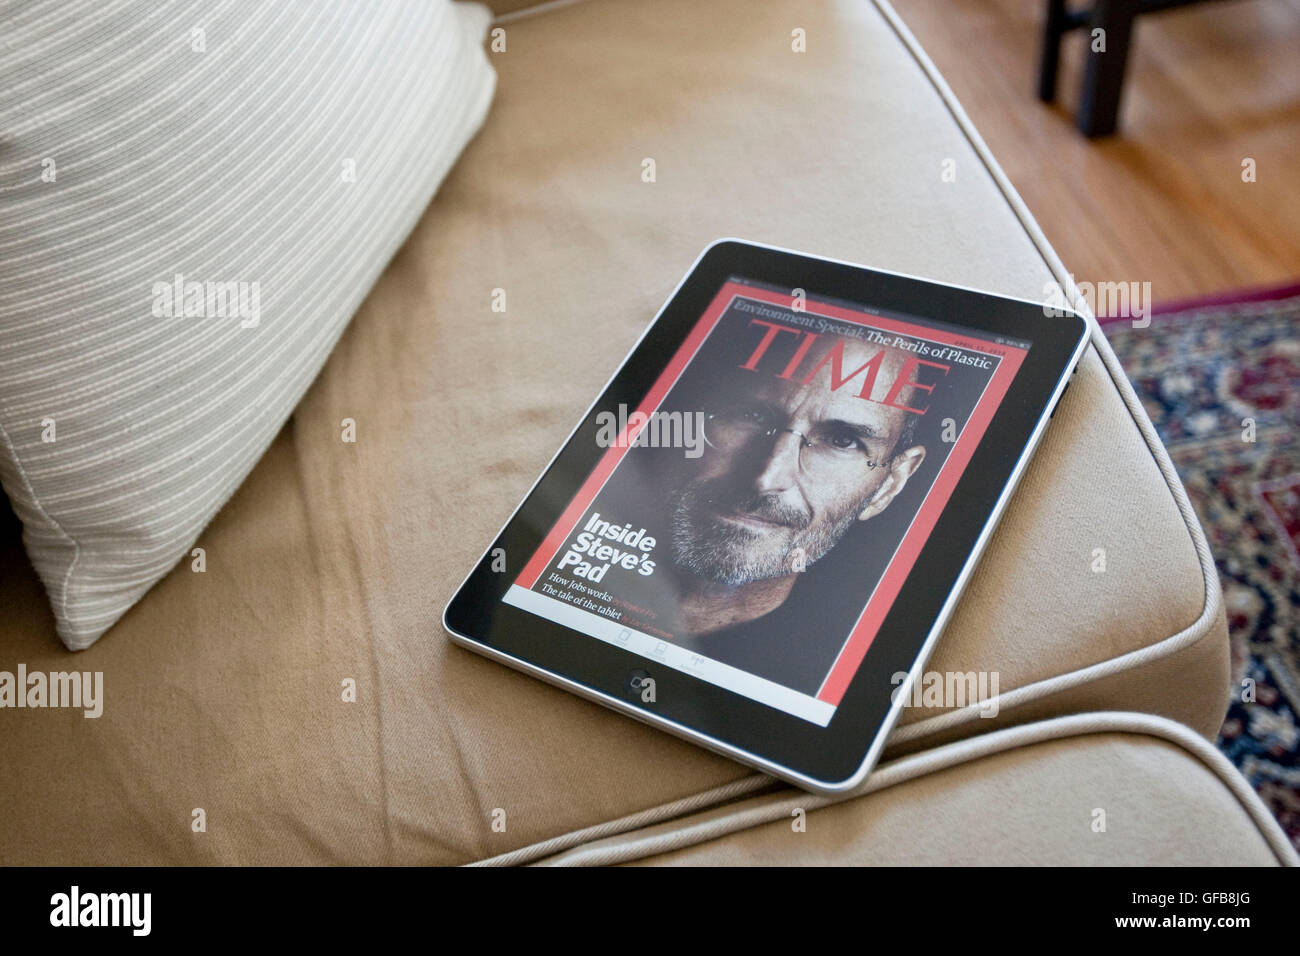 Apple iPad on an apartment sofa displaying the Time Magazine application with Steve Jobs on the cover, 2010. Stock Photo